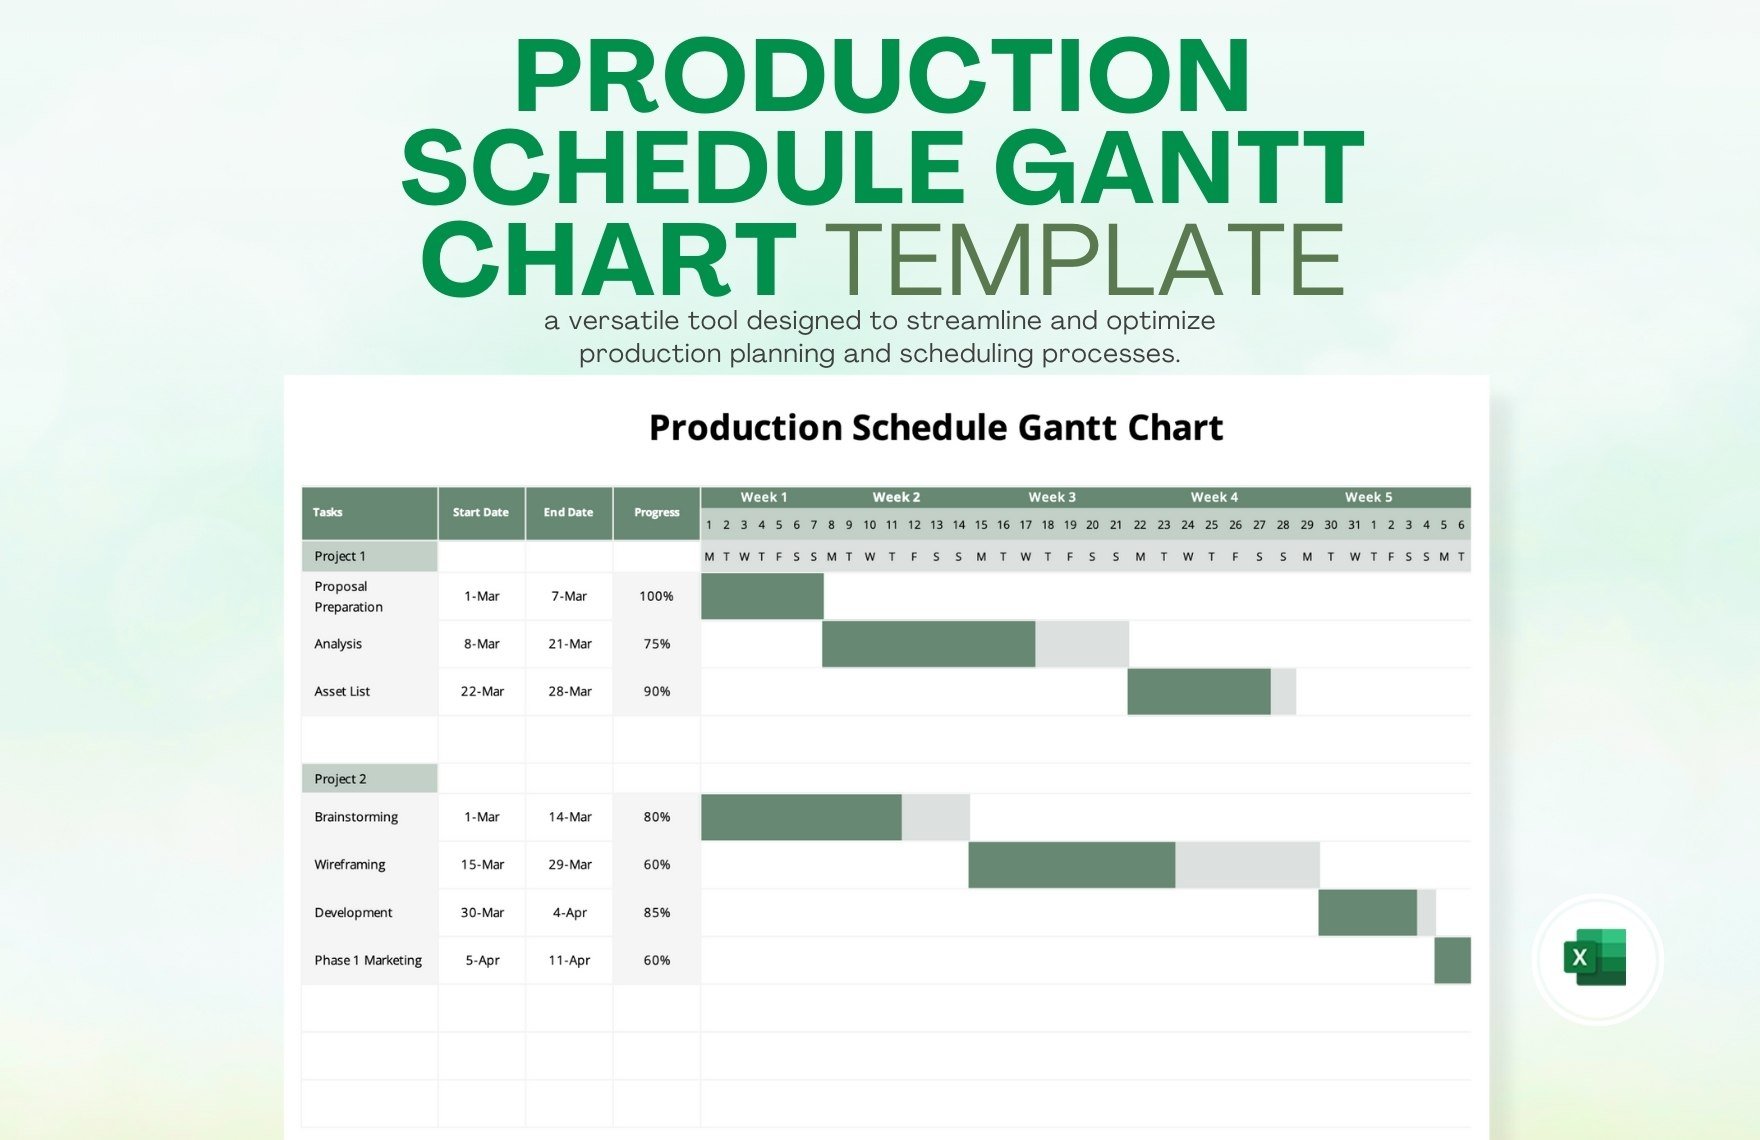 Production Schedule Gantt Chart Template in Excel